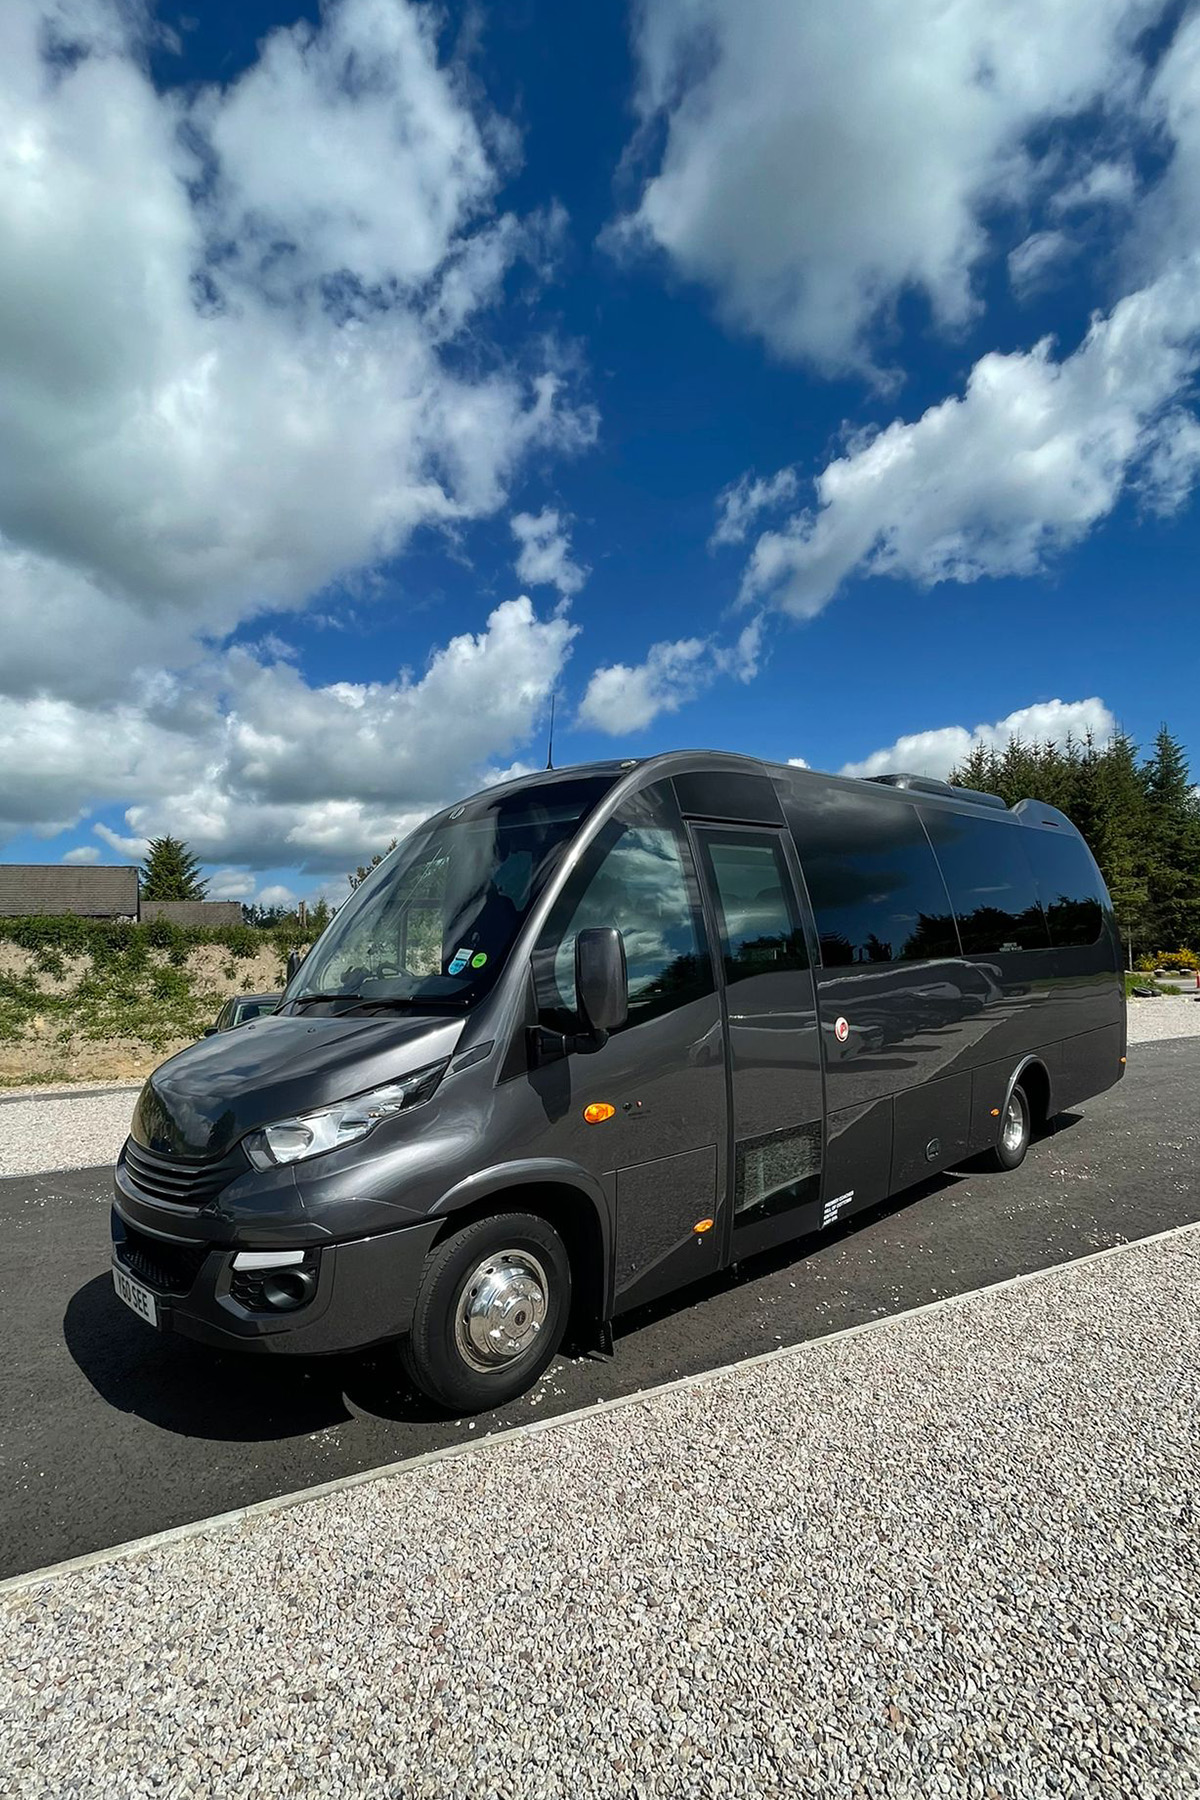 Luxury 19 Seater Side Profile - Luxe Scot